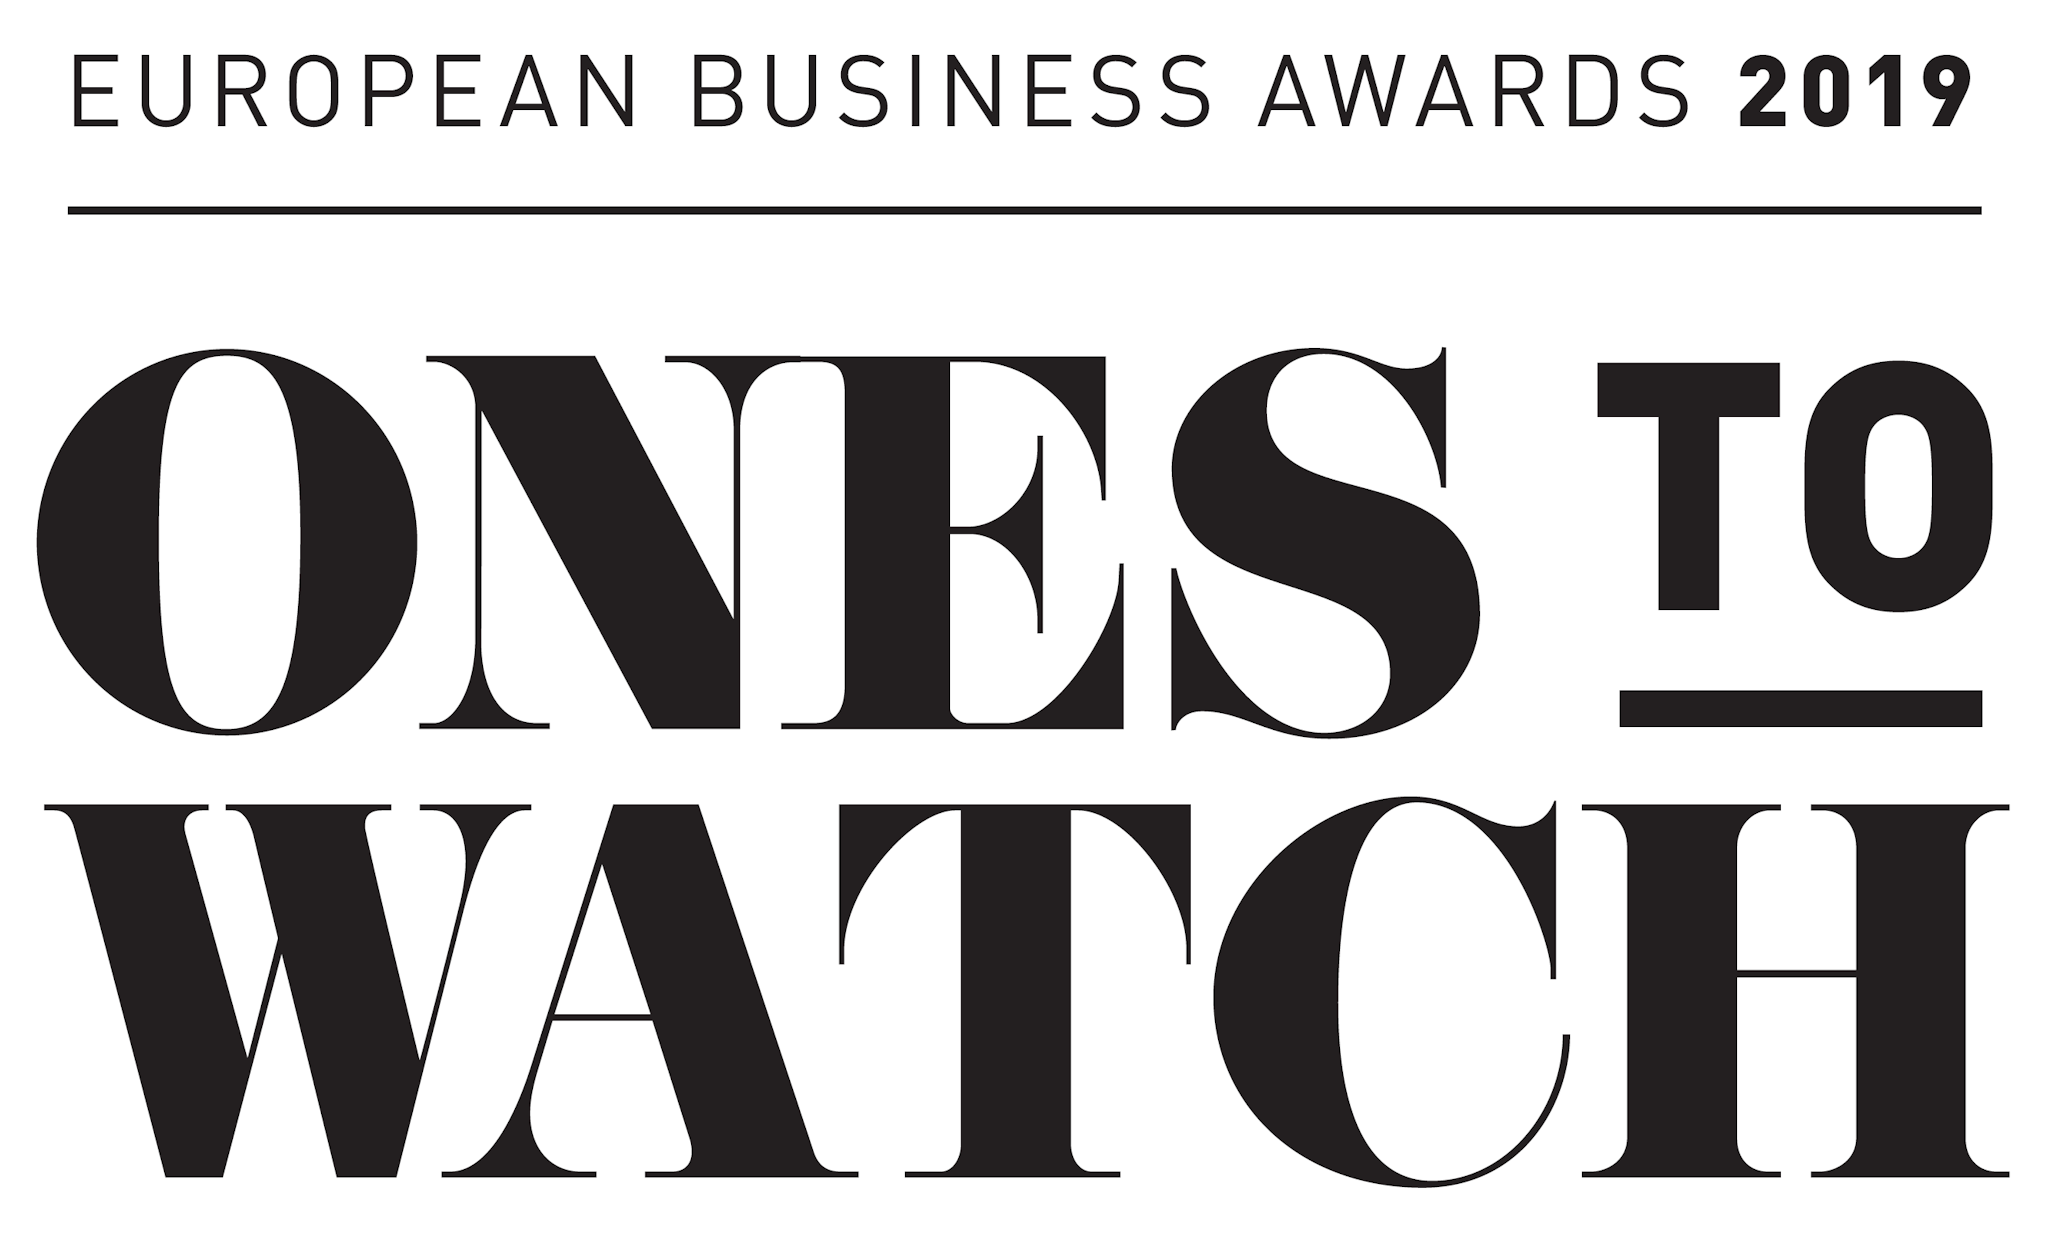 European Business Awards - "One to Watch"